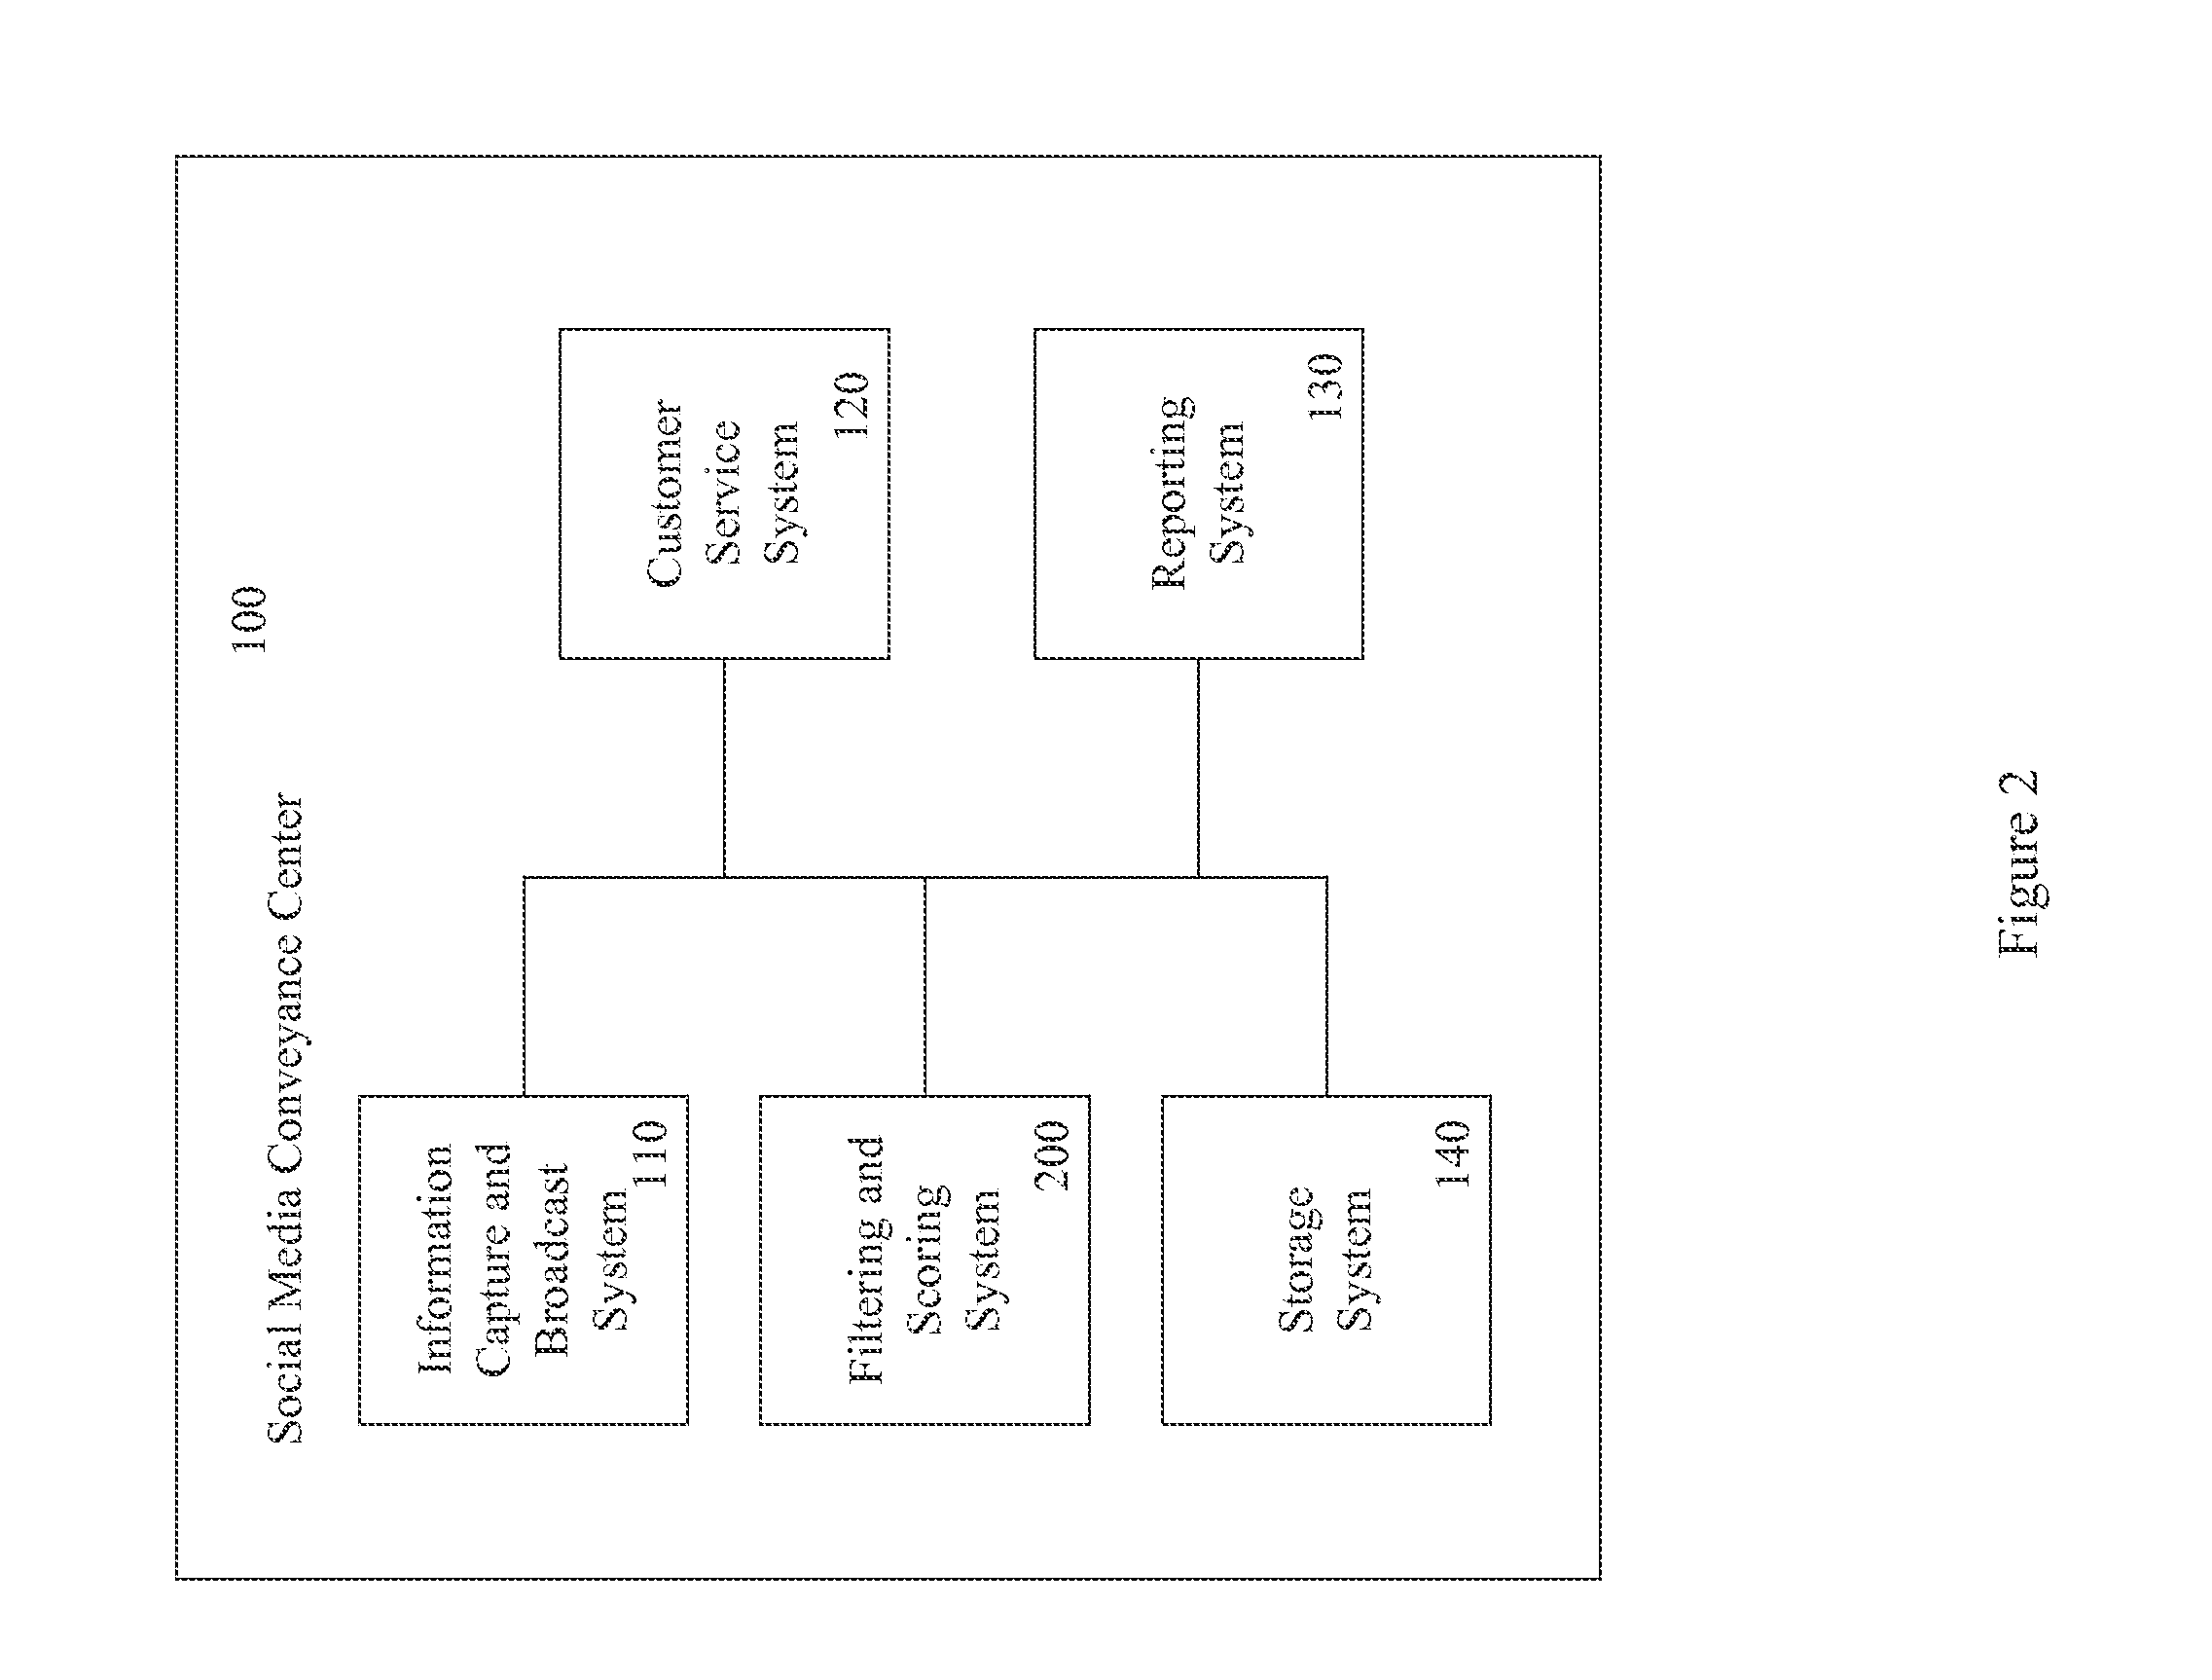 System and Method for Screening Social Media Content